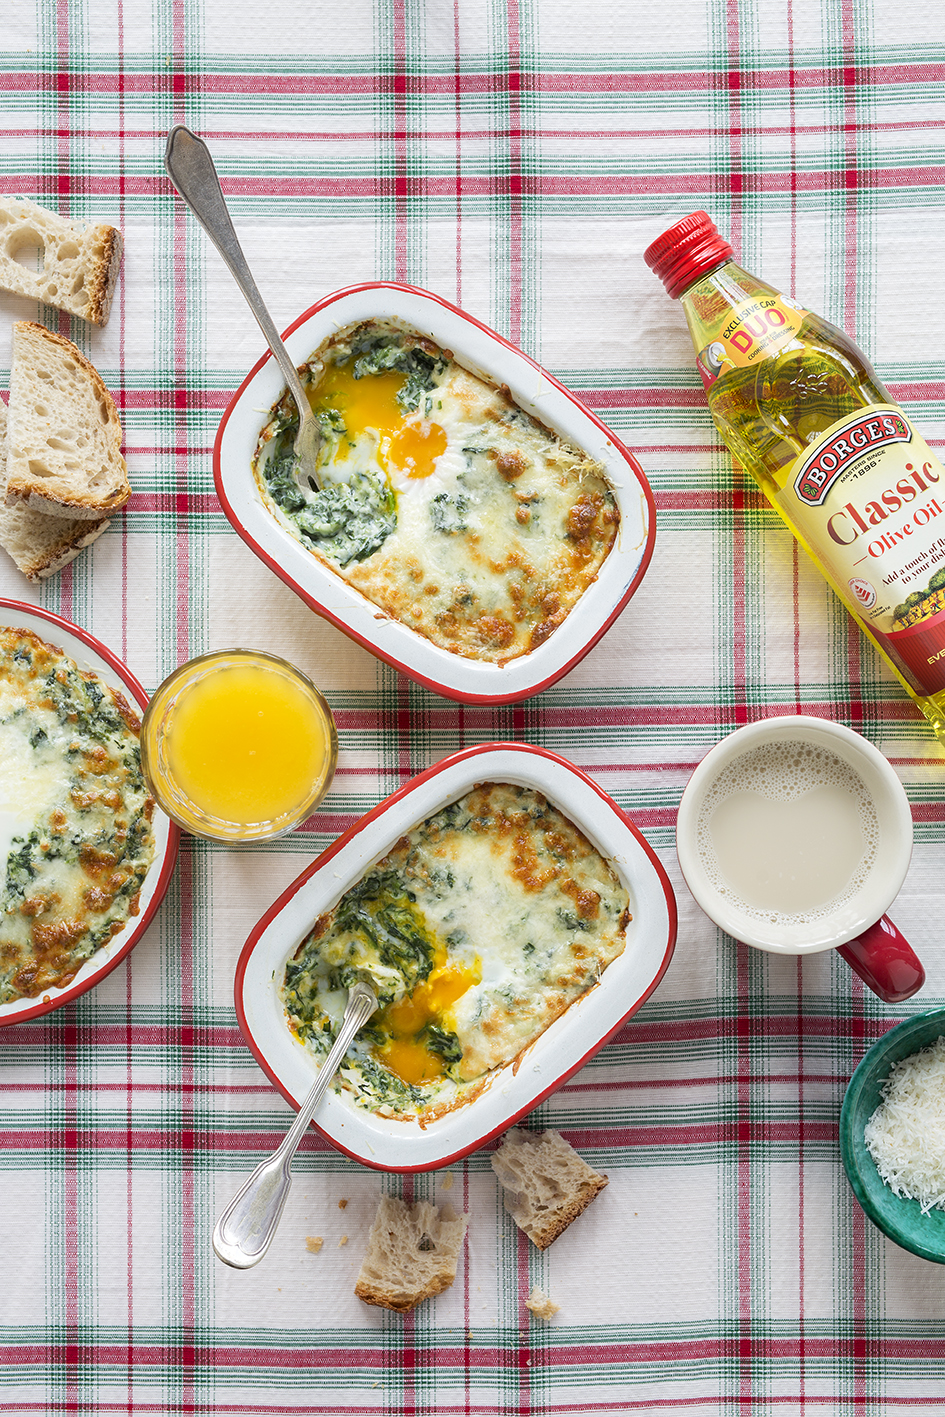 Creamed spinach baked eggs